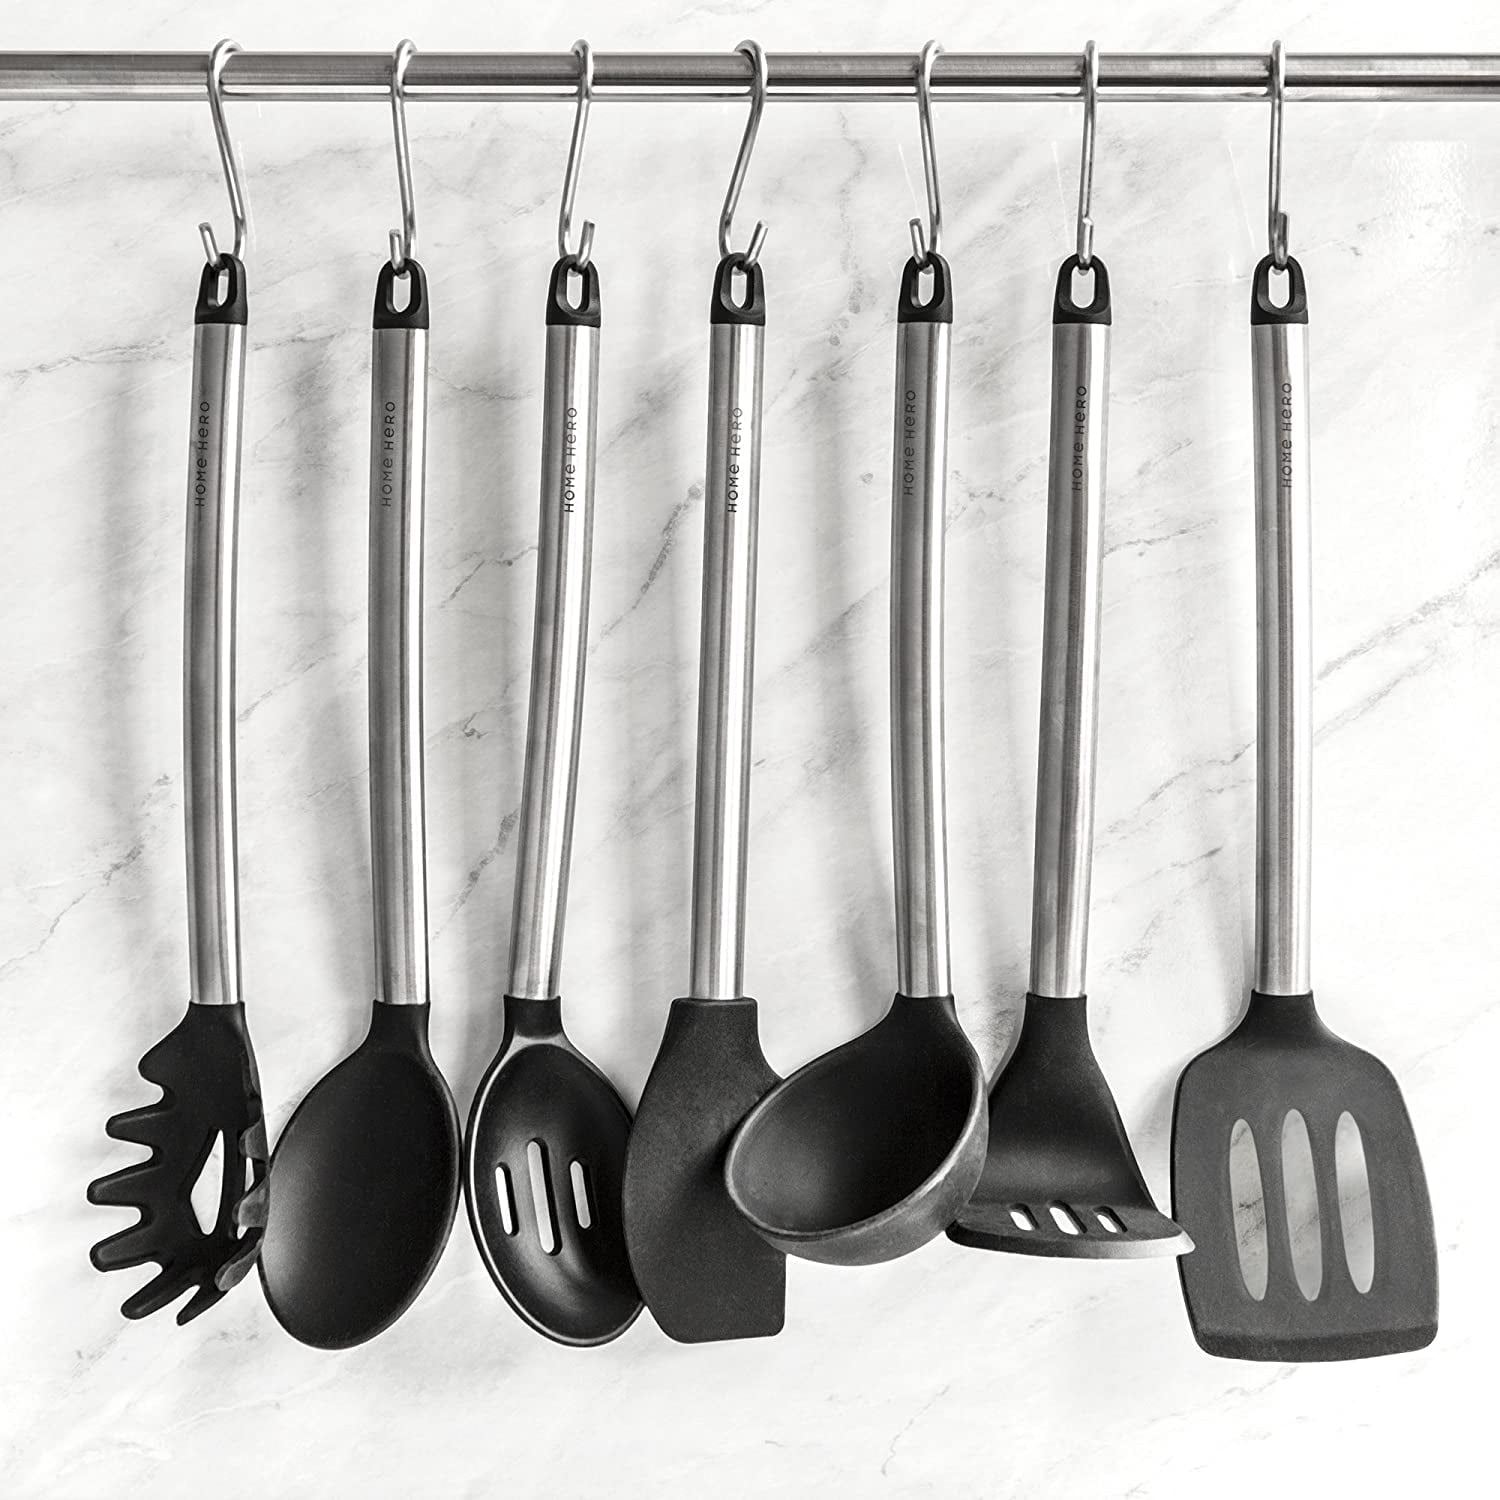 Dropship 23Pcs Kitchen Utensil Set Stainless Steel Nylon Heat Resistant Cooking  Utensil Tool Kit to Sell Online at a Lower Price